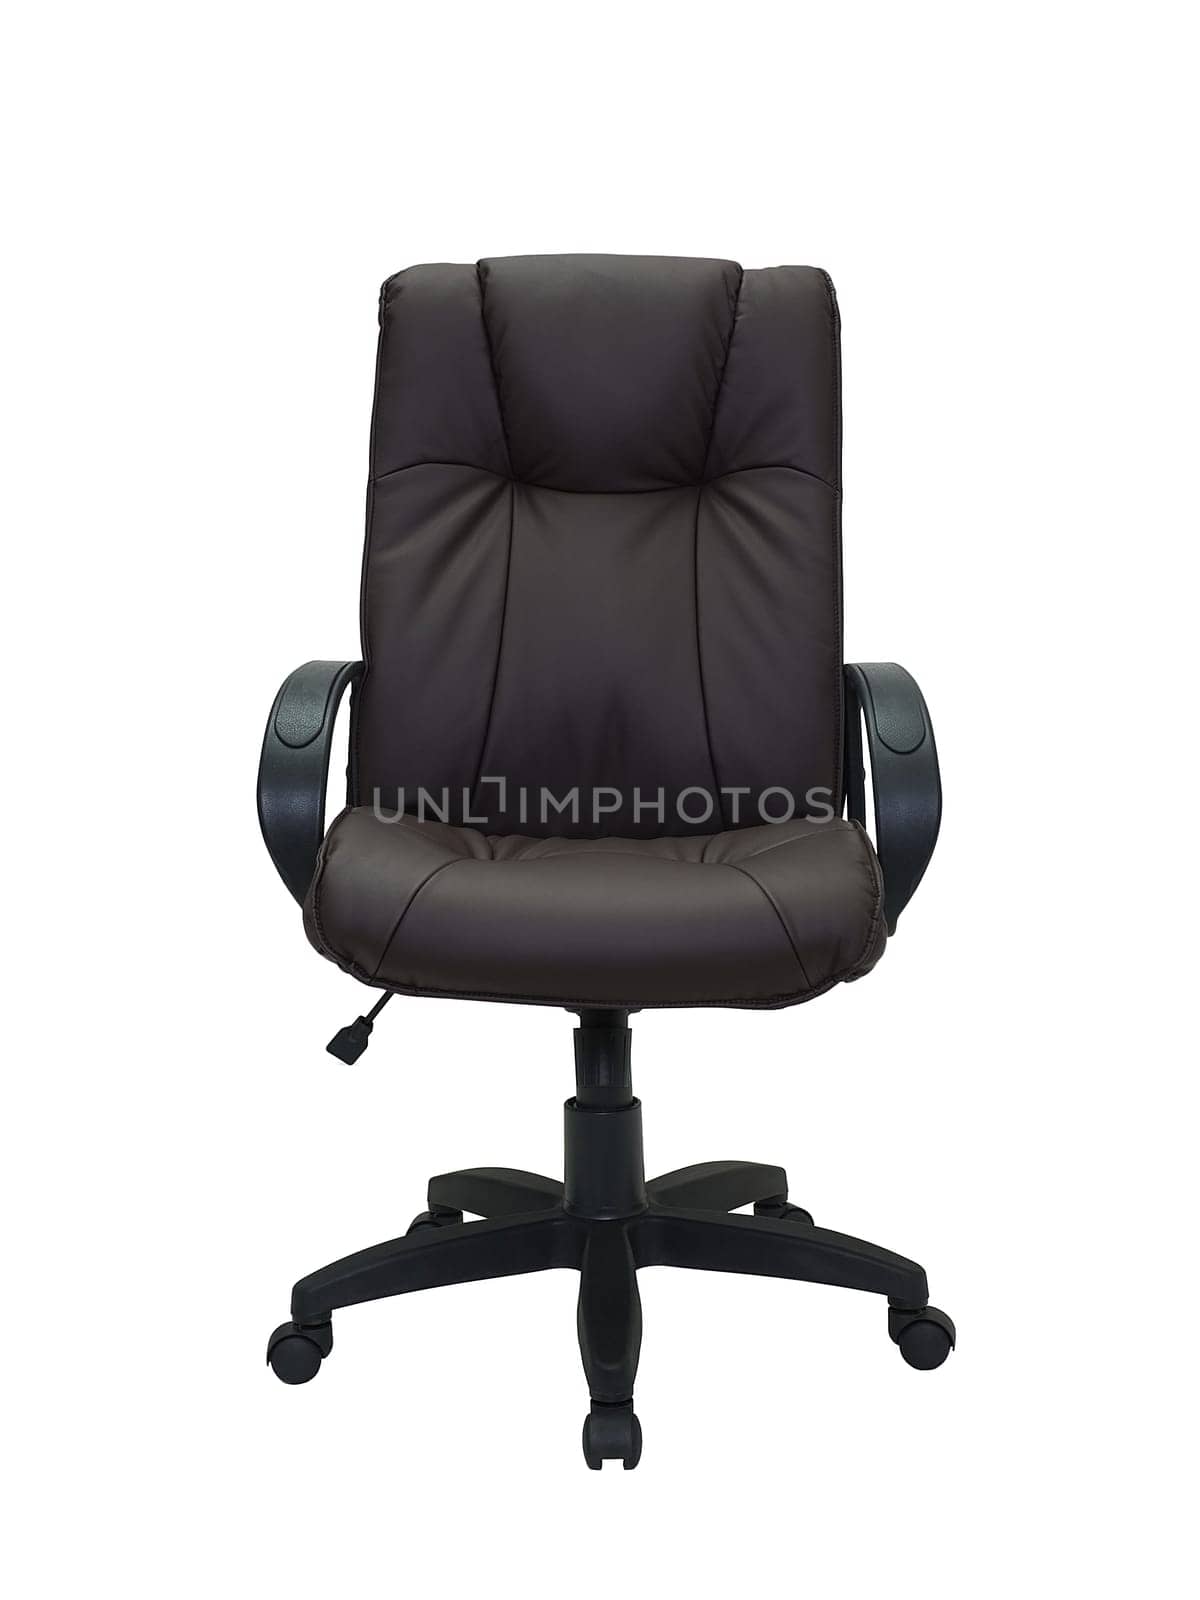 brown office armchair on wheels isolated on white background, front view by artemzatsepilin